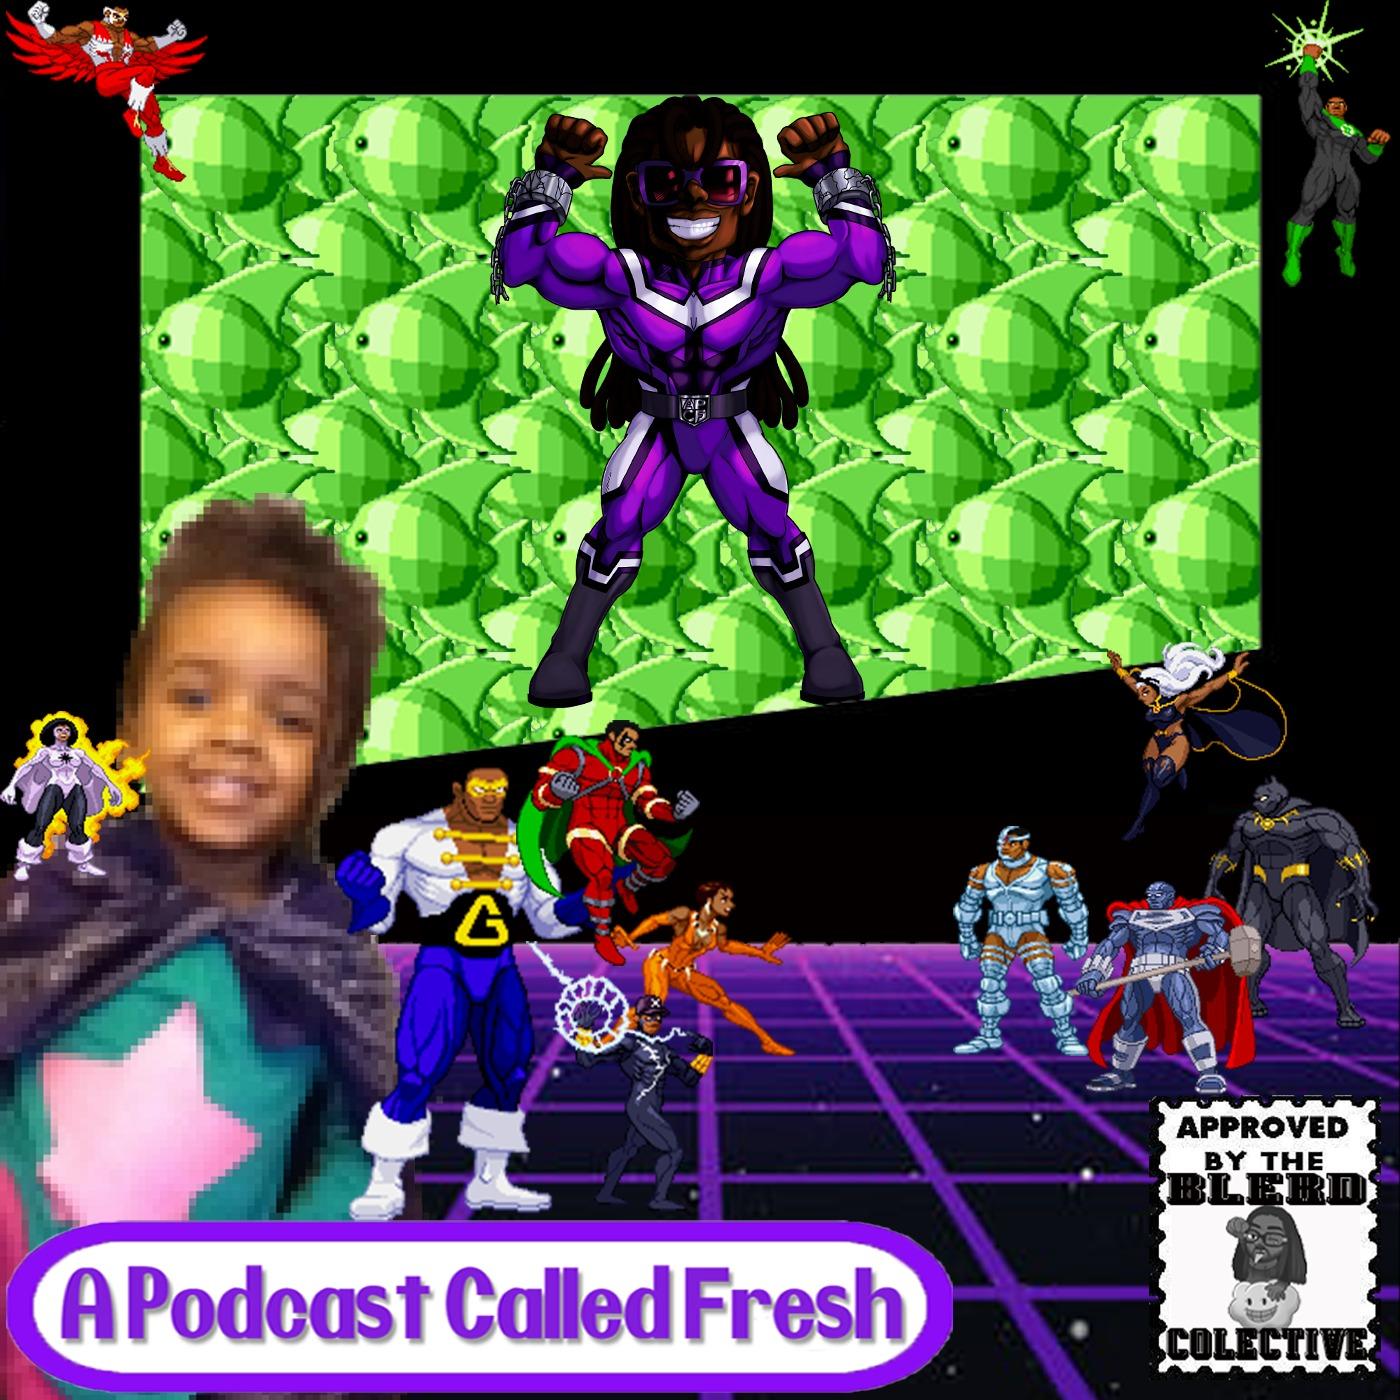 A Podcast Called Fresh